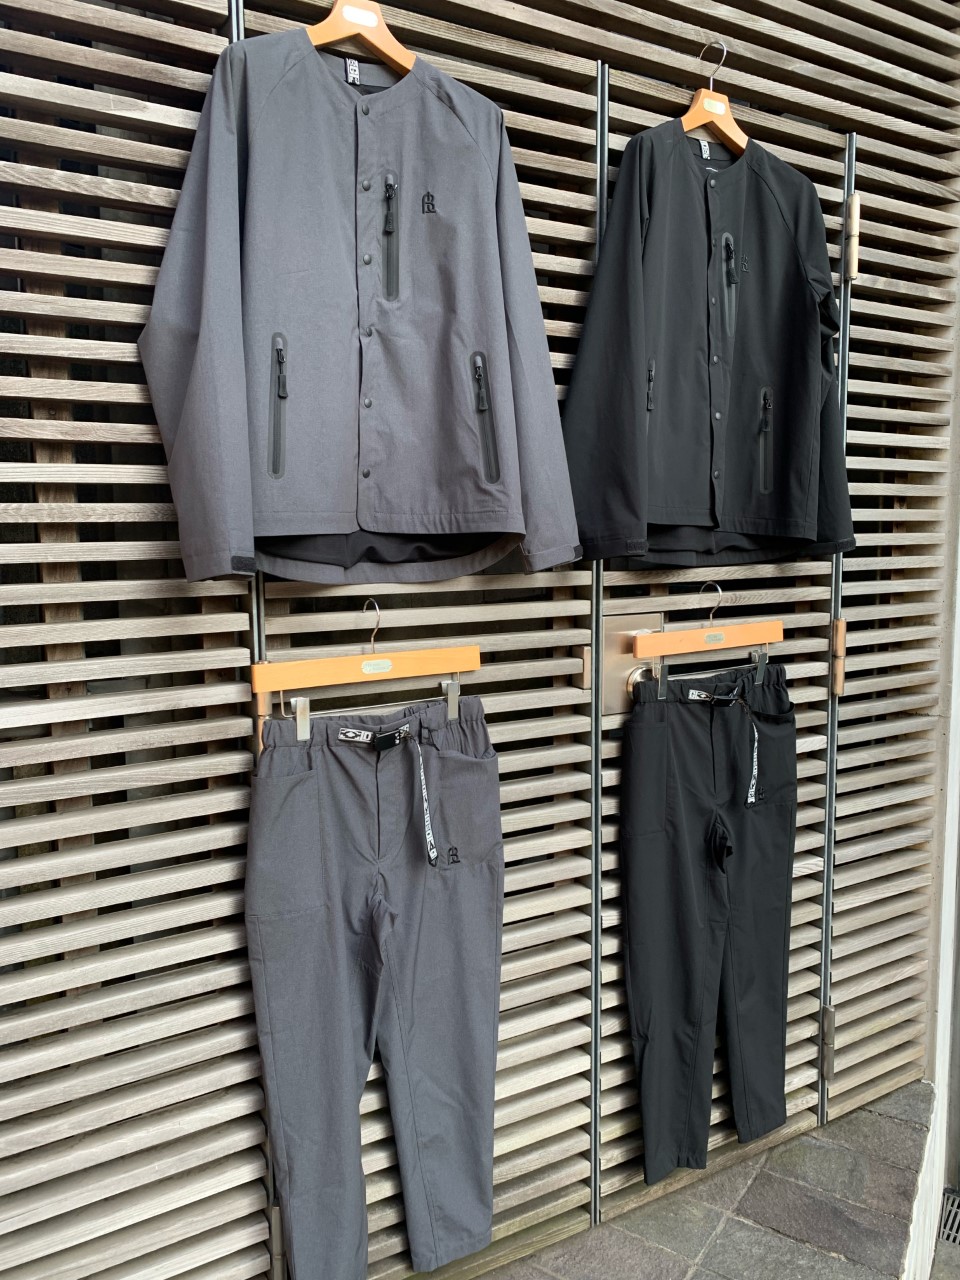 BLACK LABEL WATER REPELLENT SET UP＞ – The DUFFER of St.GEORGE